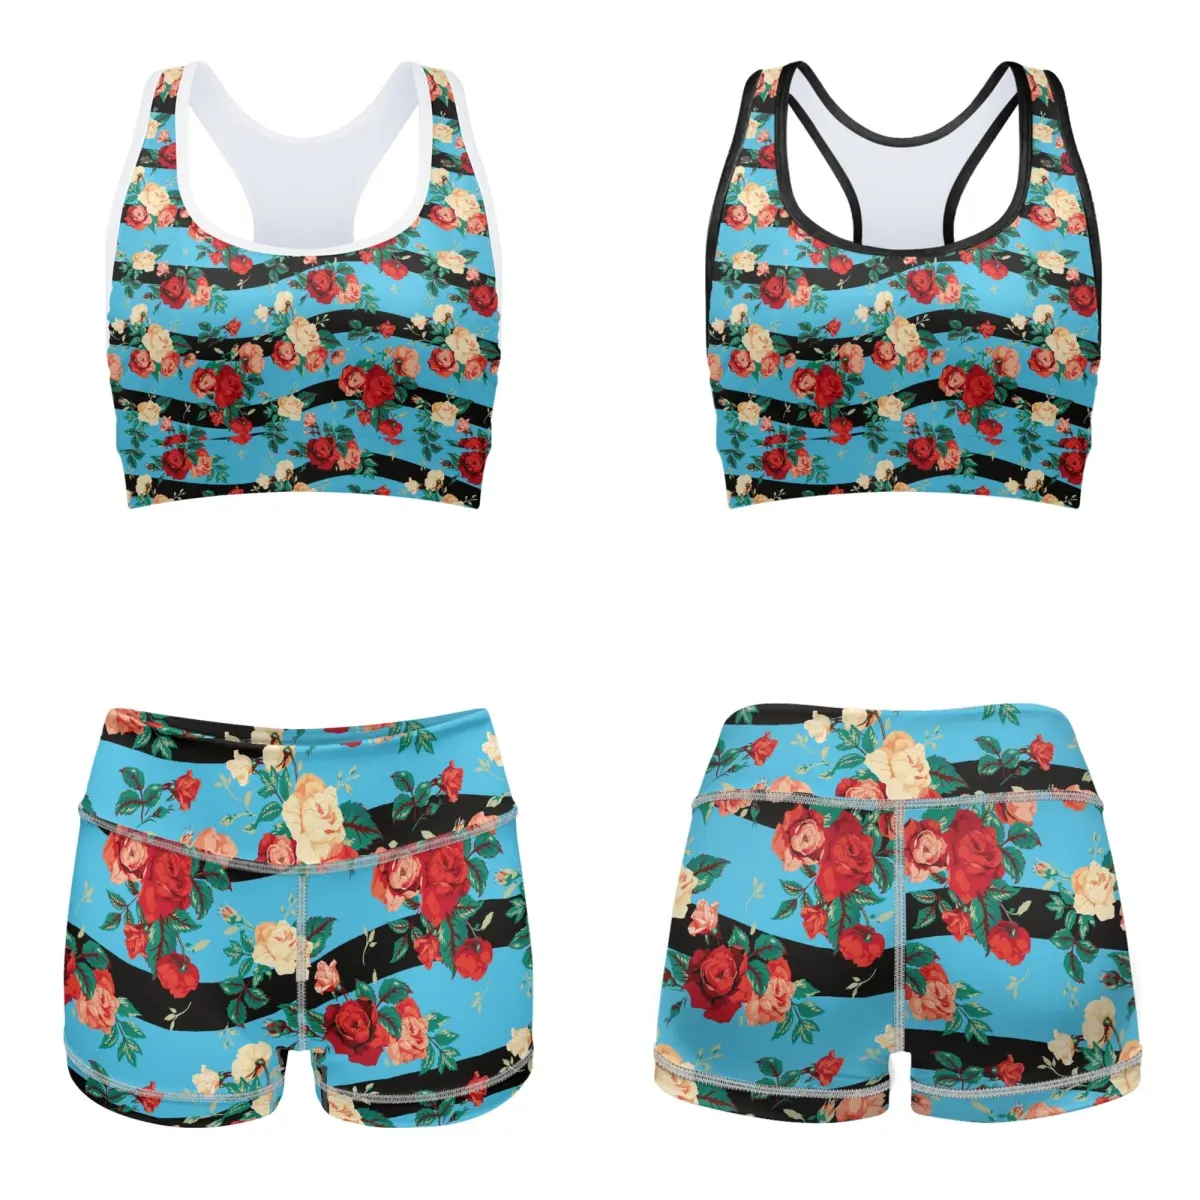 Custom Designed Yoga Suit With Tropical Elements Wholesale Gym Soft And Quick Drying Sets Leisure Polyester Spandex Suit